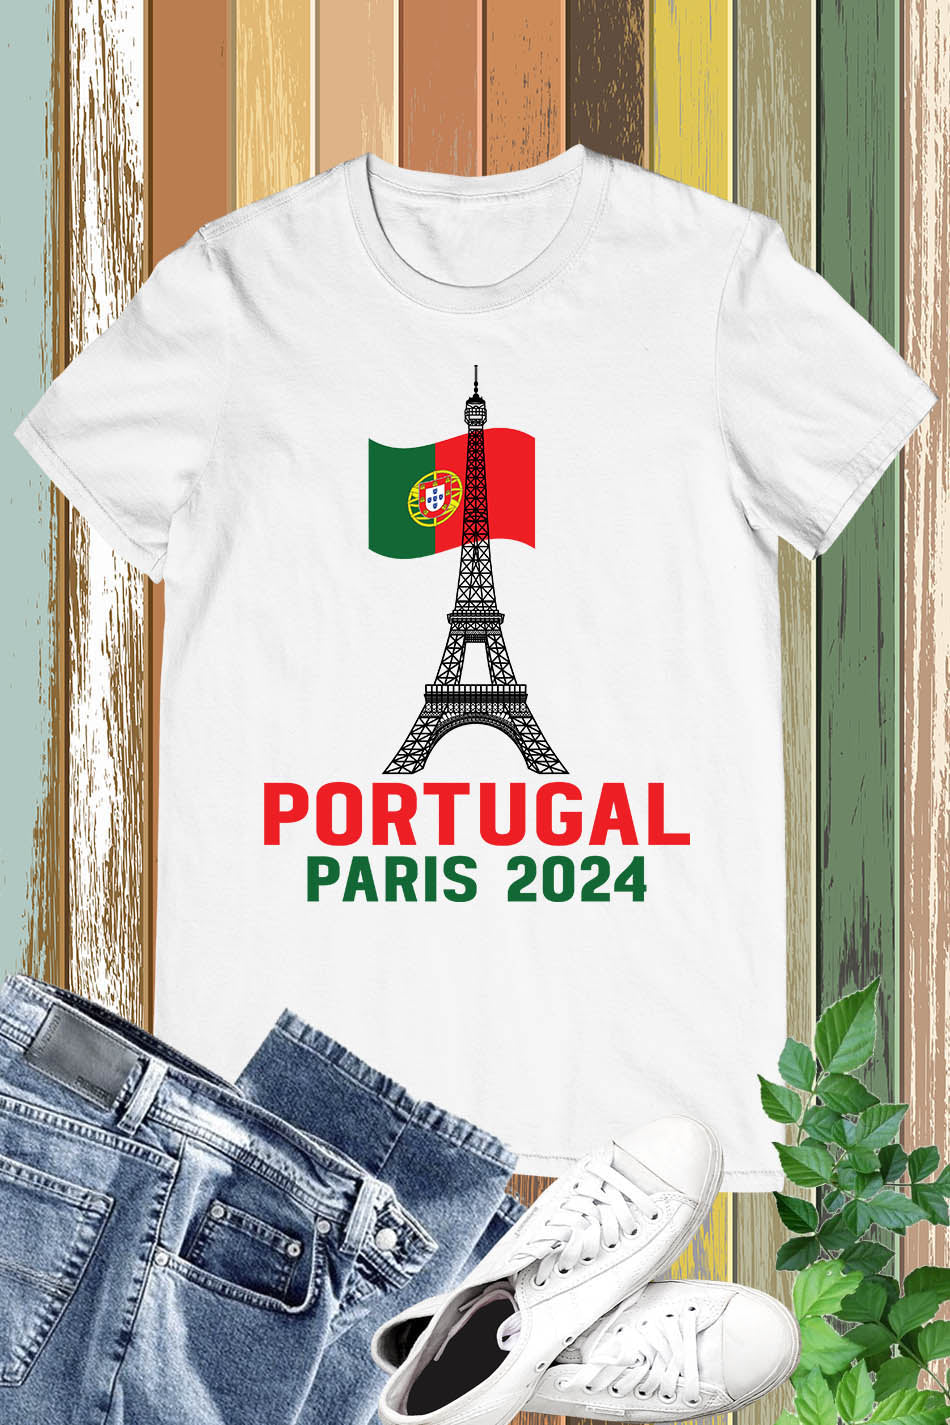 Portugal Olympics Supporter Paris 2024 T Shirt